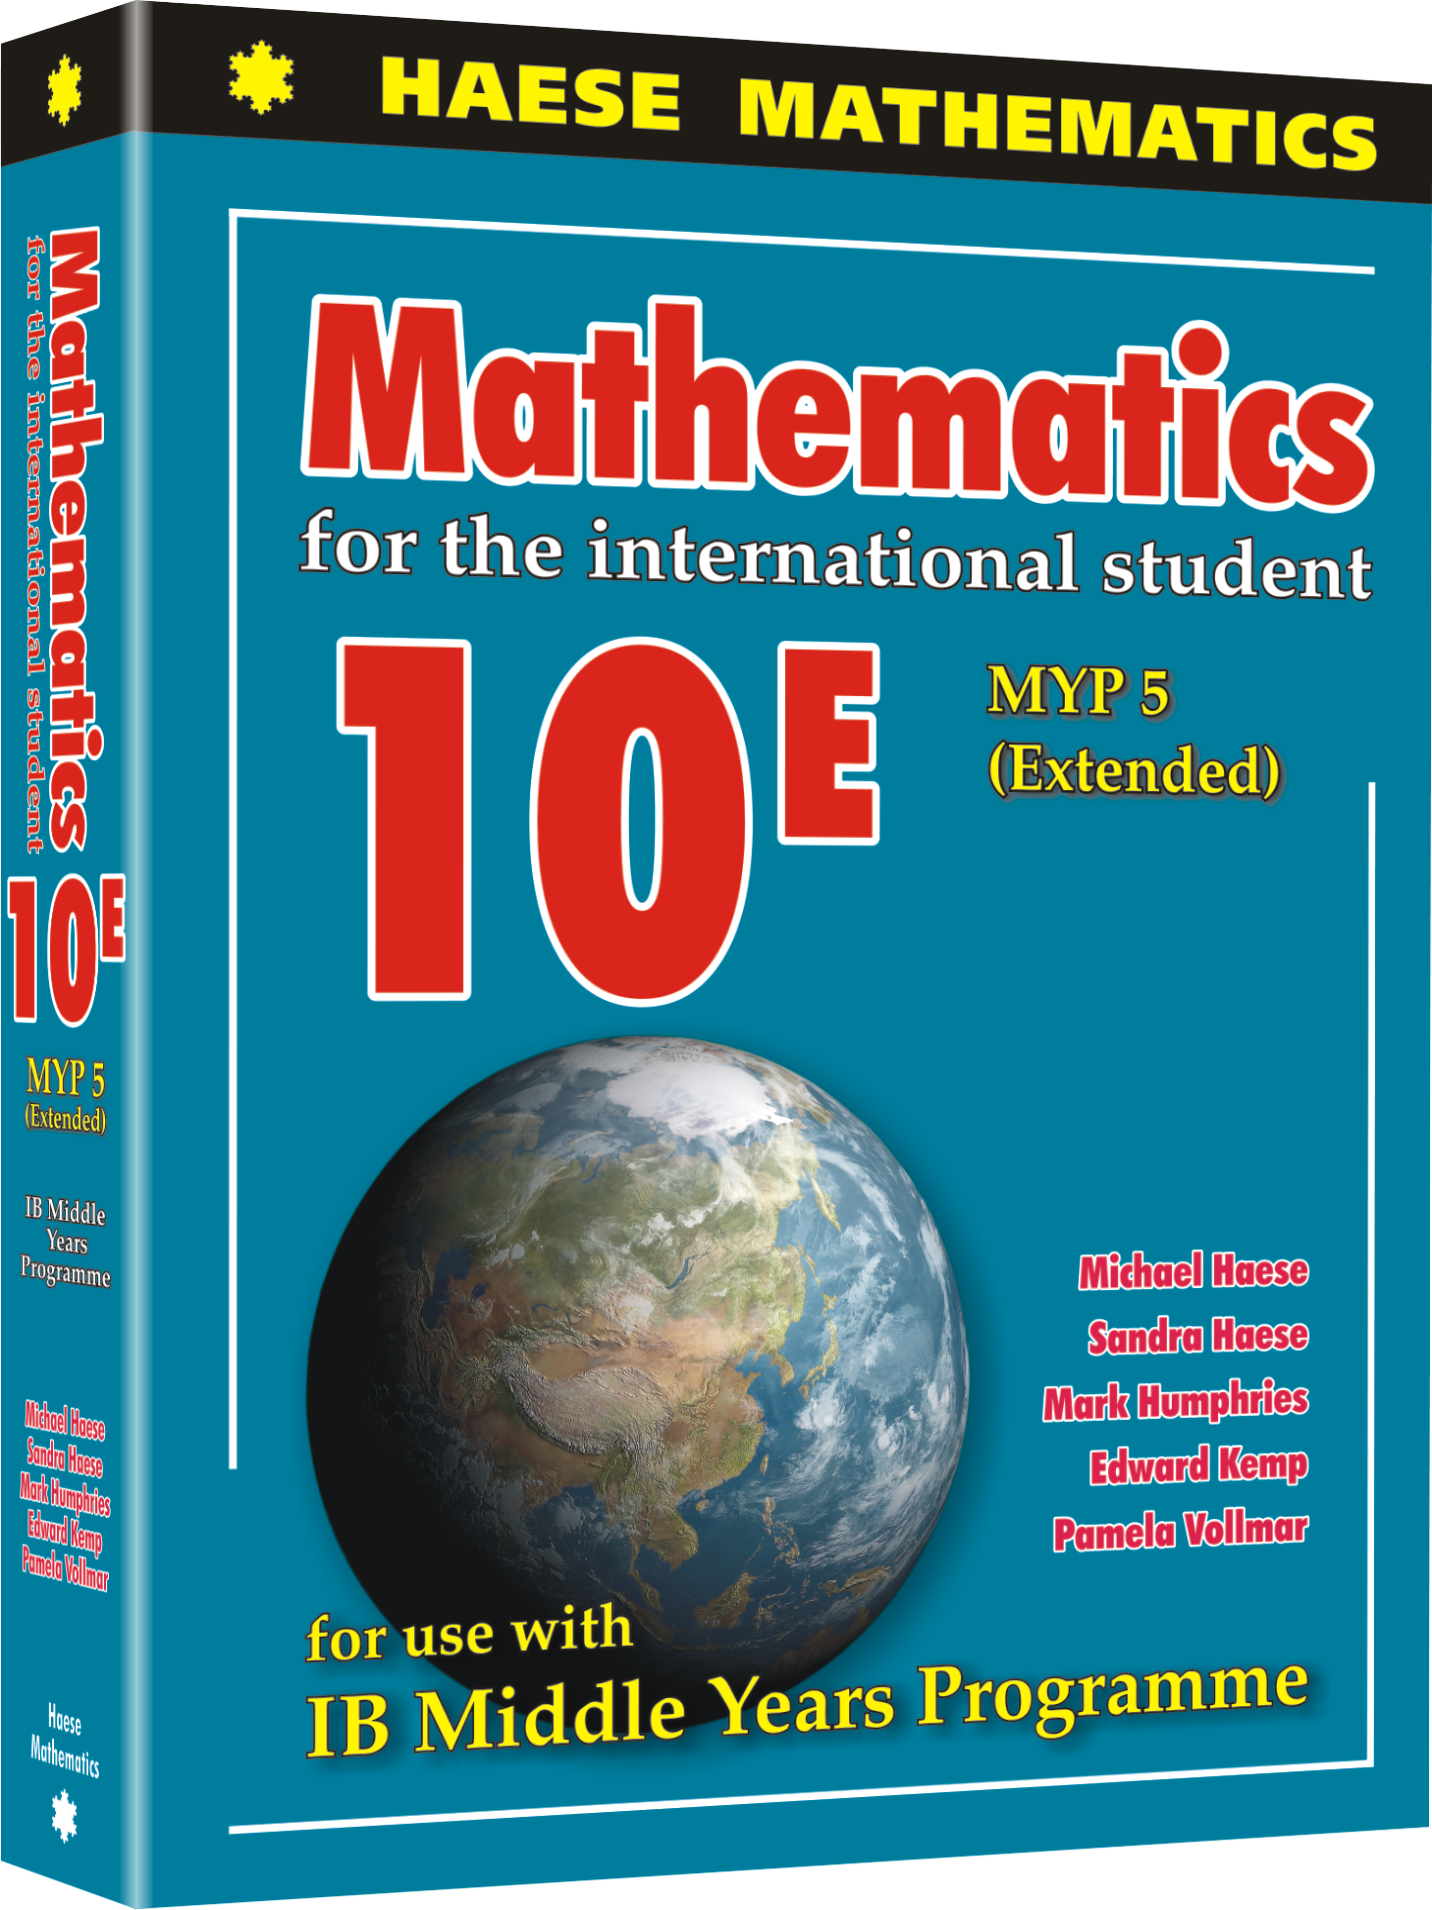 Haese mathematics year 10 pdf free download how to download play store app in pc